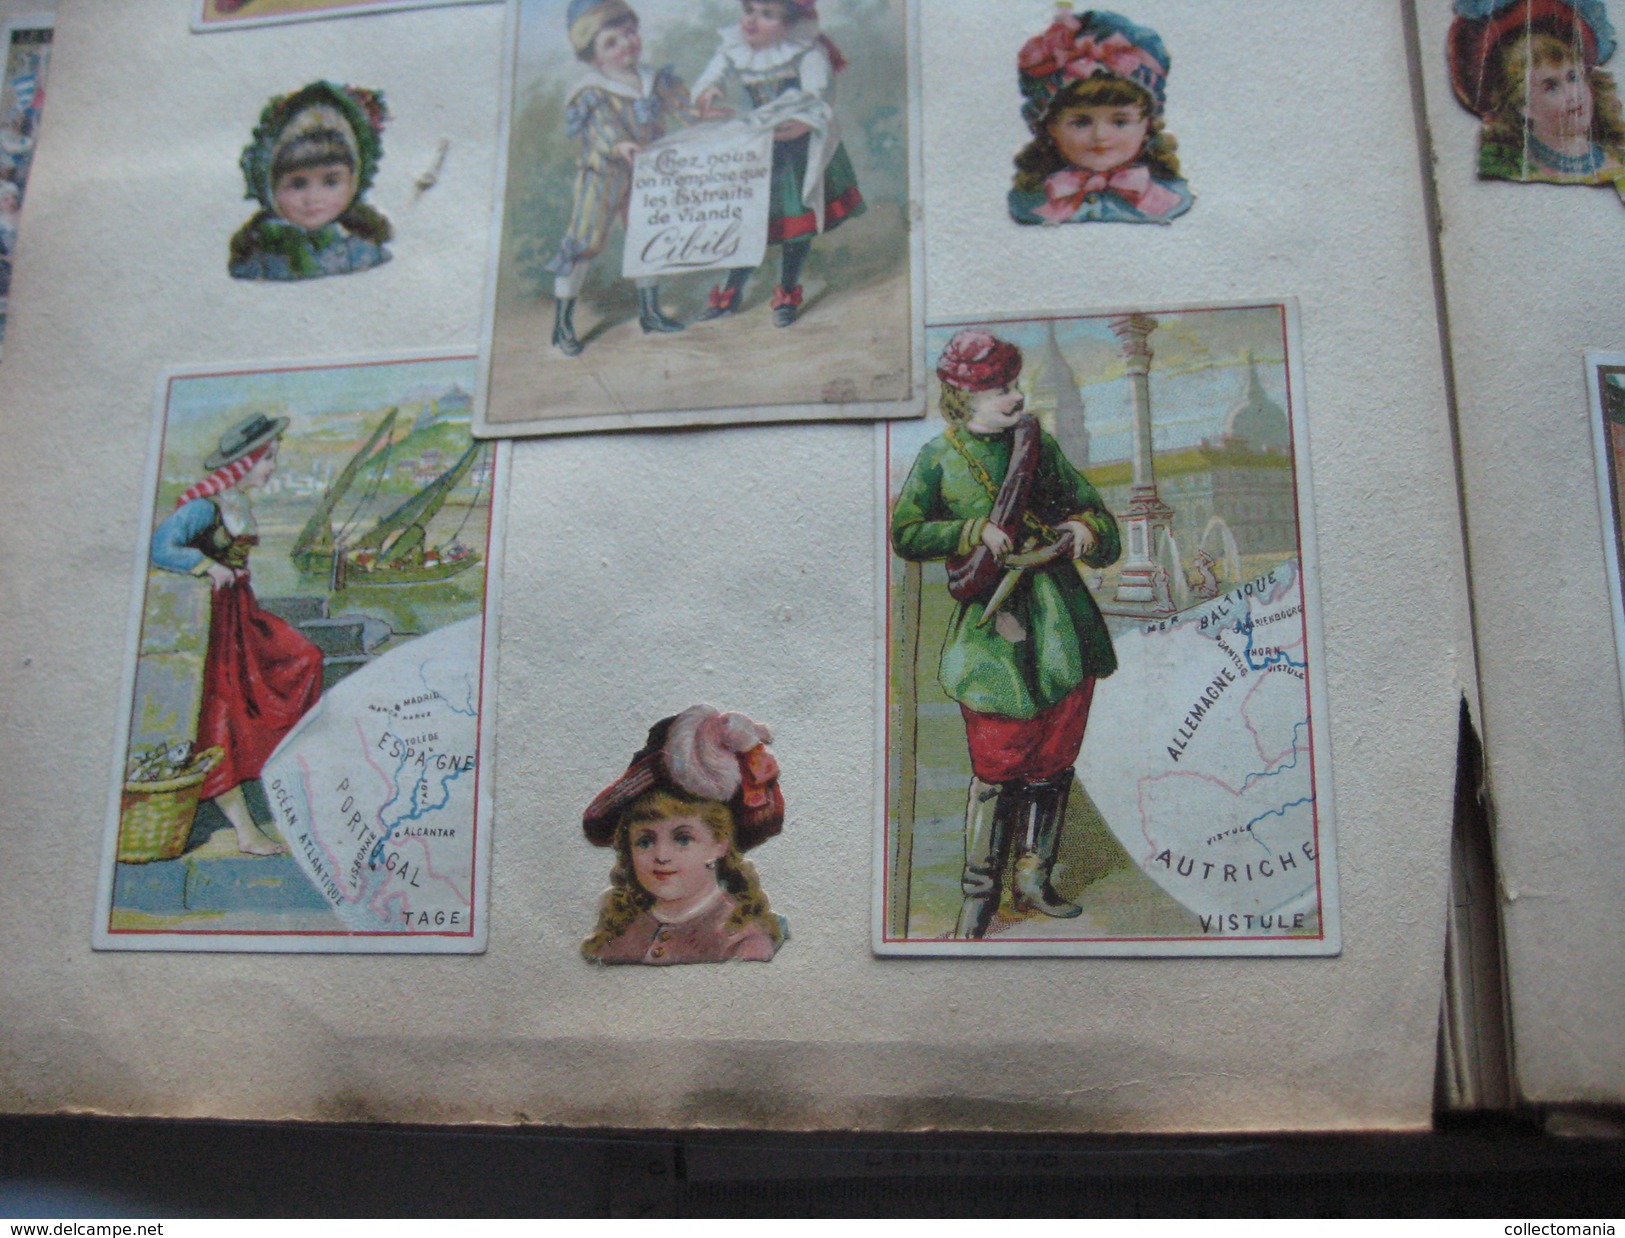 Album c1890, all thematic many litho advertising compl sets, hundreds of trade cards : Liebig, Huntley, many topics